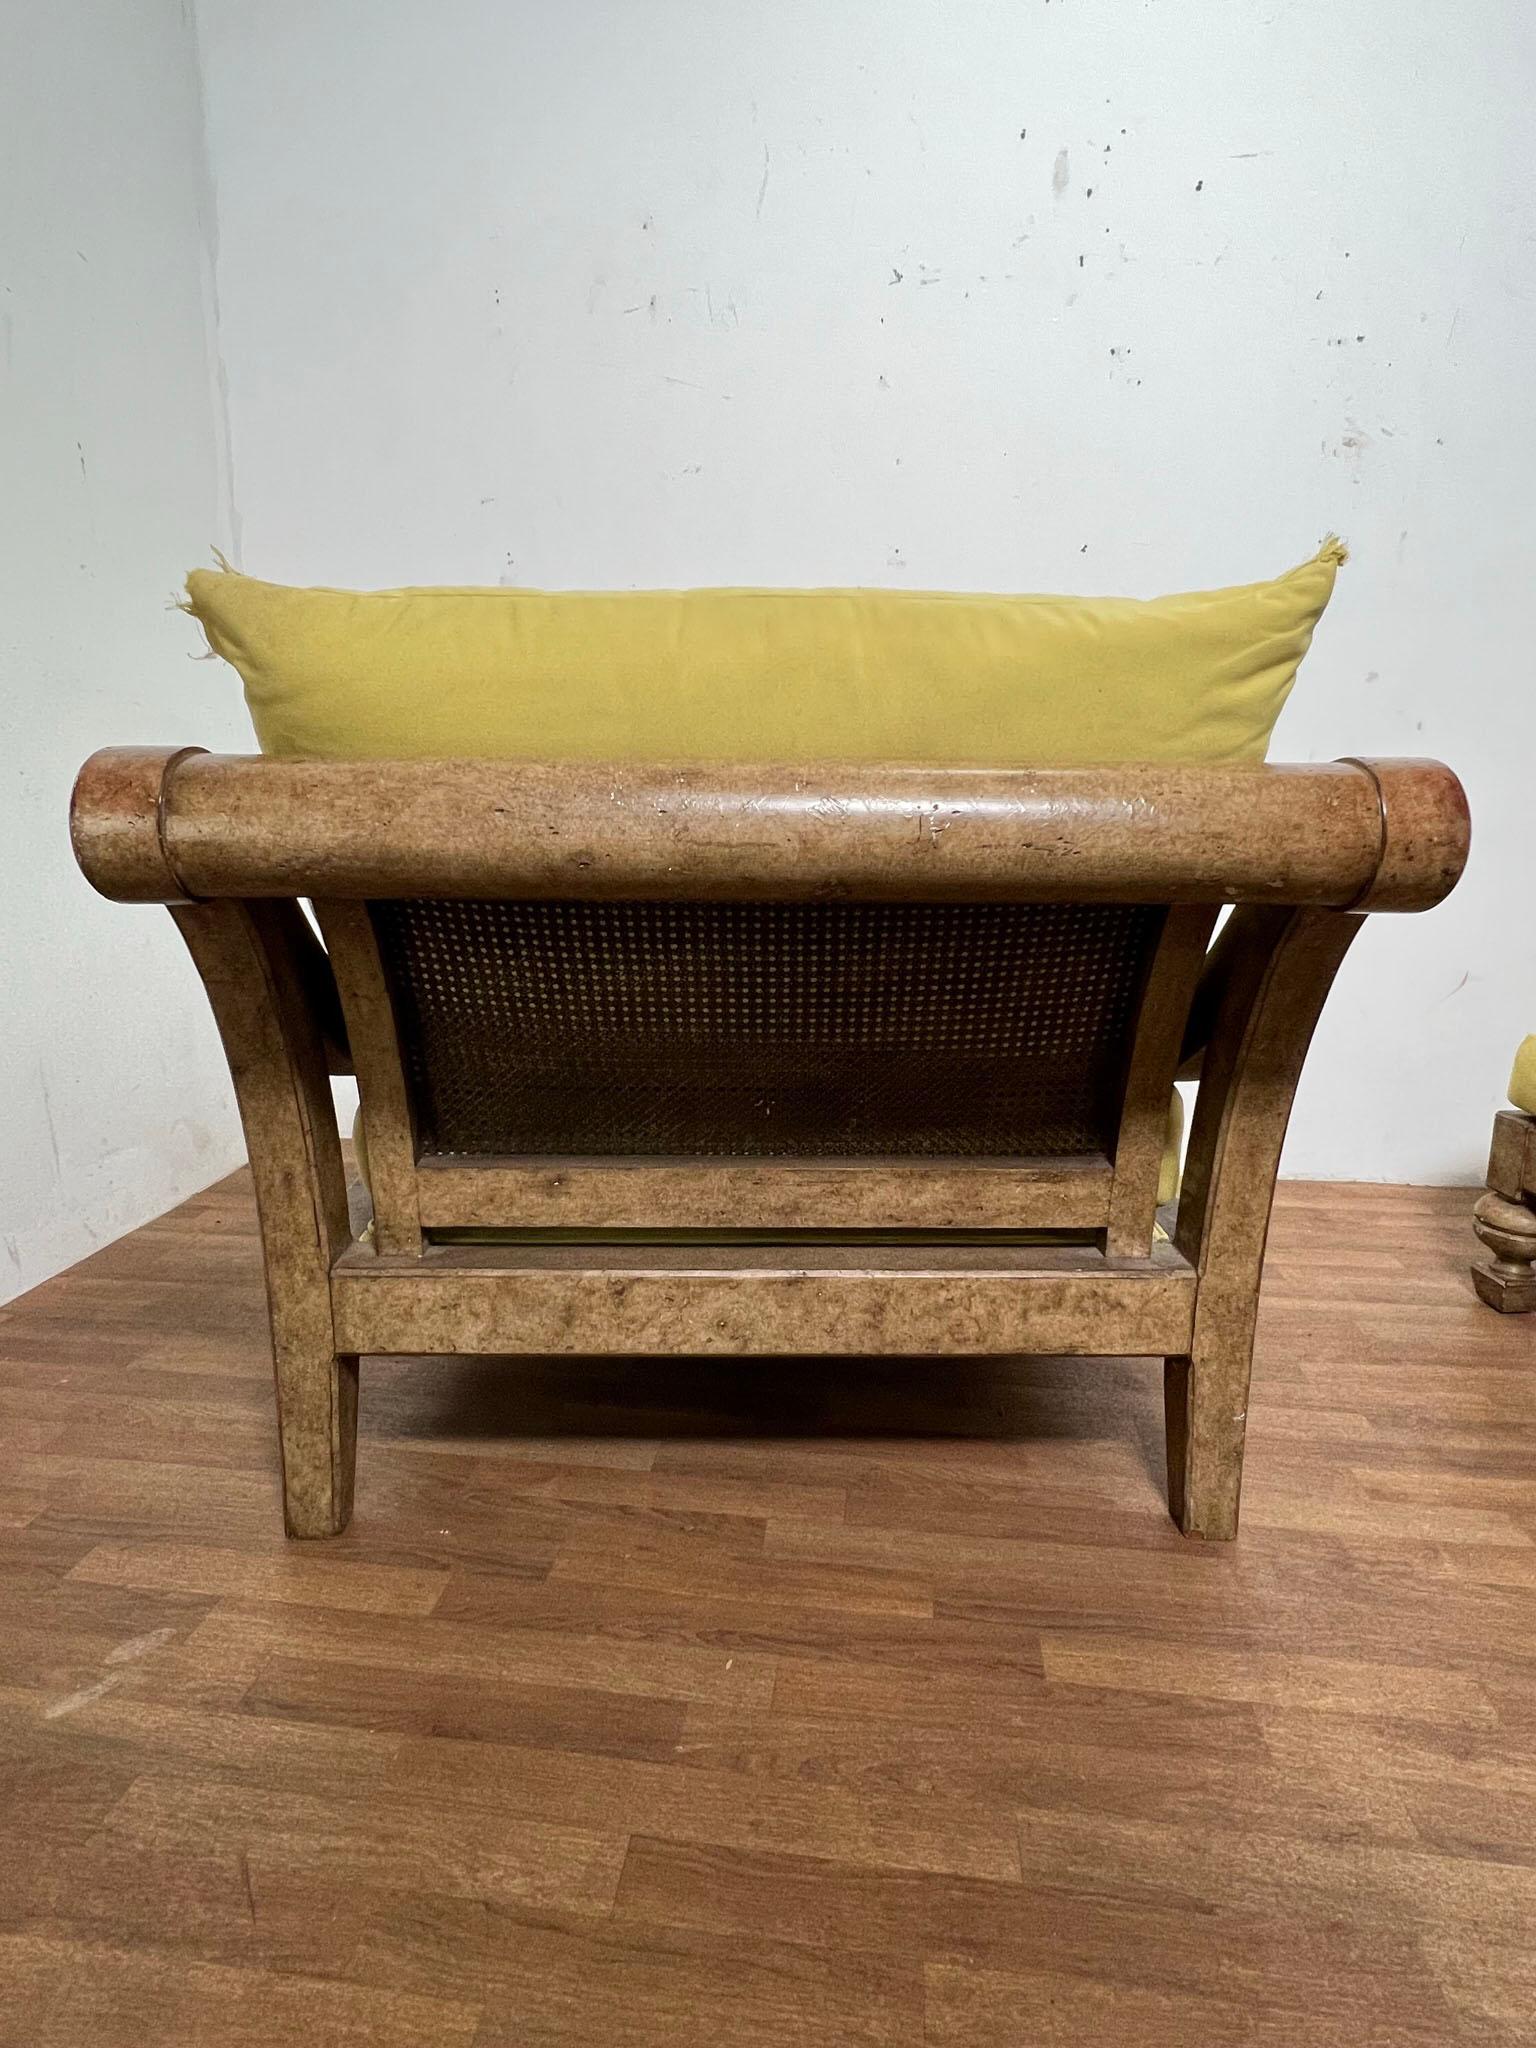 Upholstery Marge Carson Oversized Burl Wood and Cane Lounge With Ottoman Circa 1980s For Sale